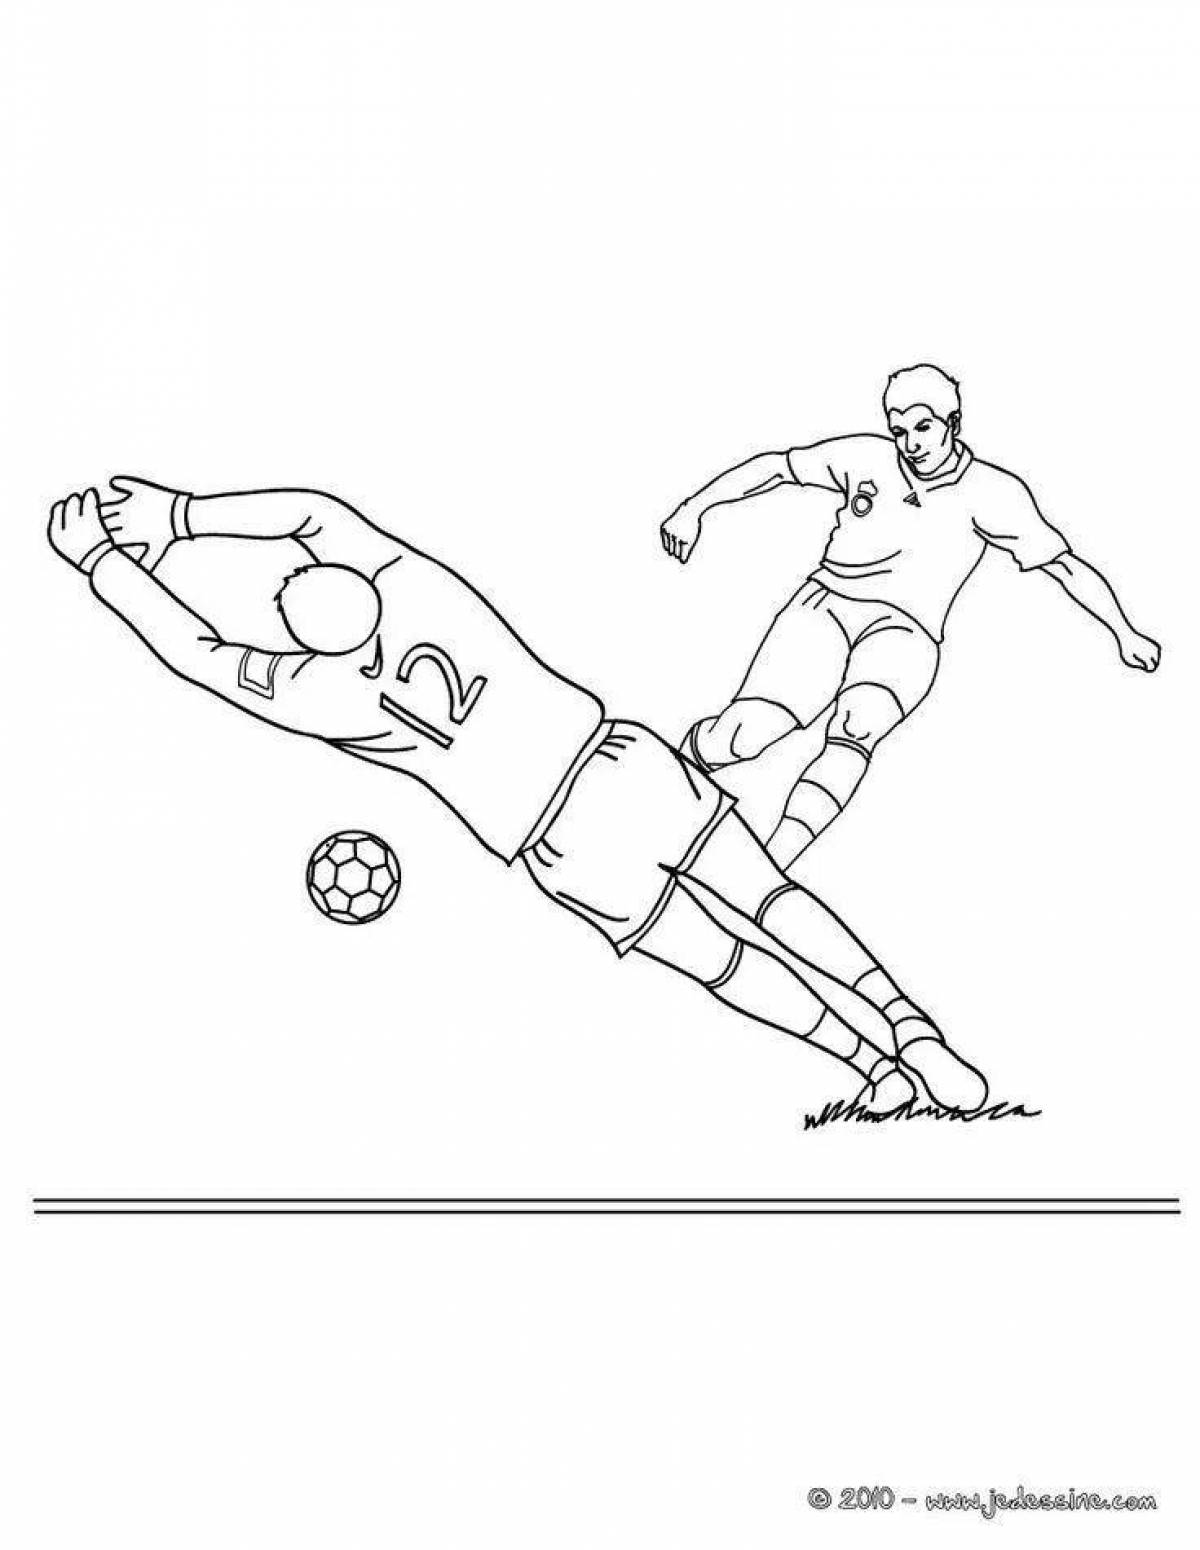 Coloring page bold football goalkeeper